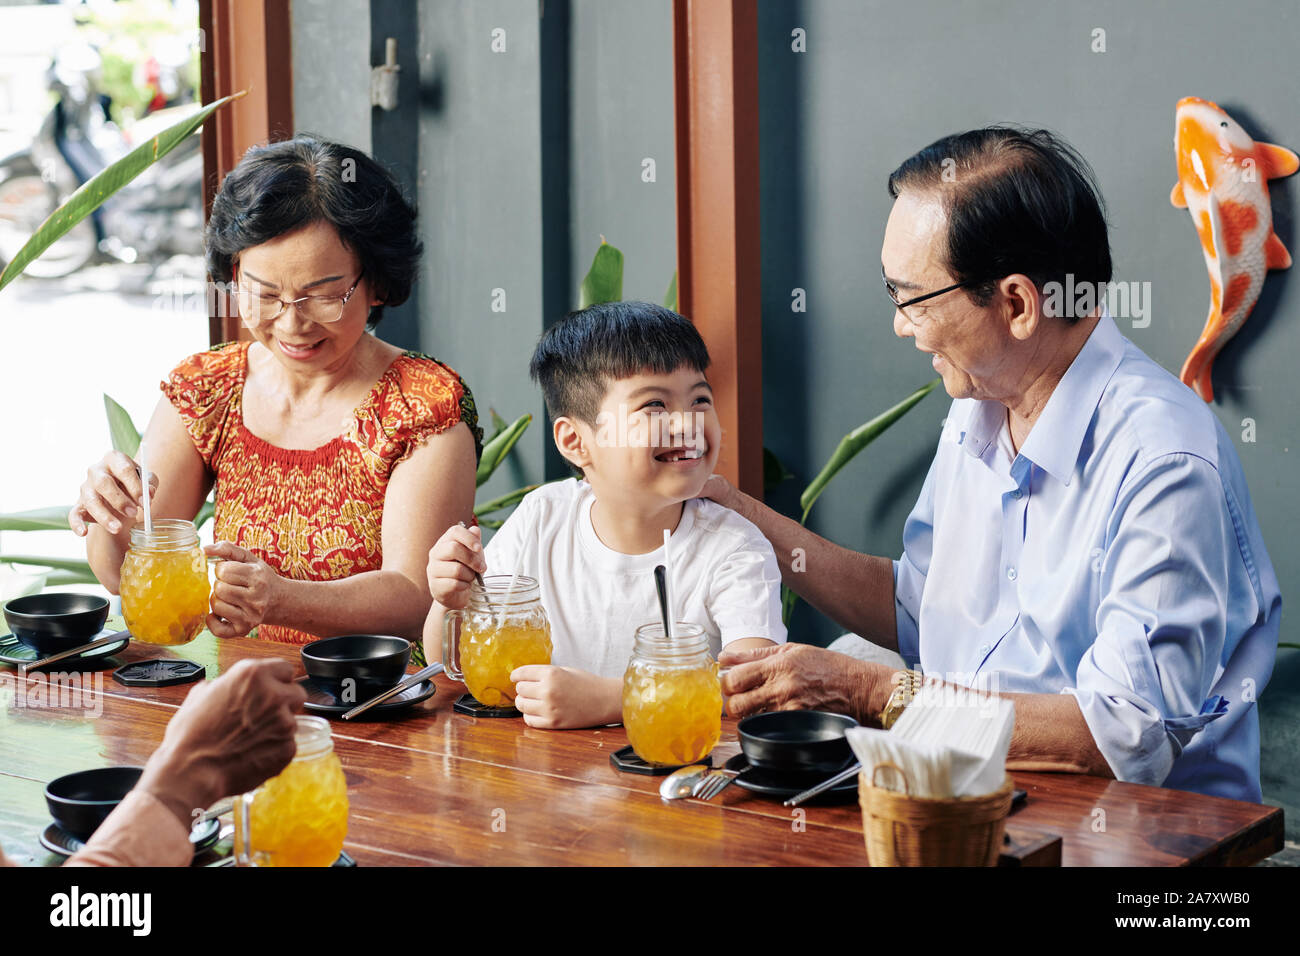 Happy little Vietnamese boy enjoying spending time with grandparents in cafe Stock Photo